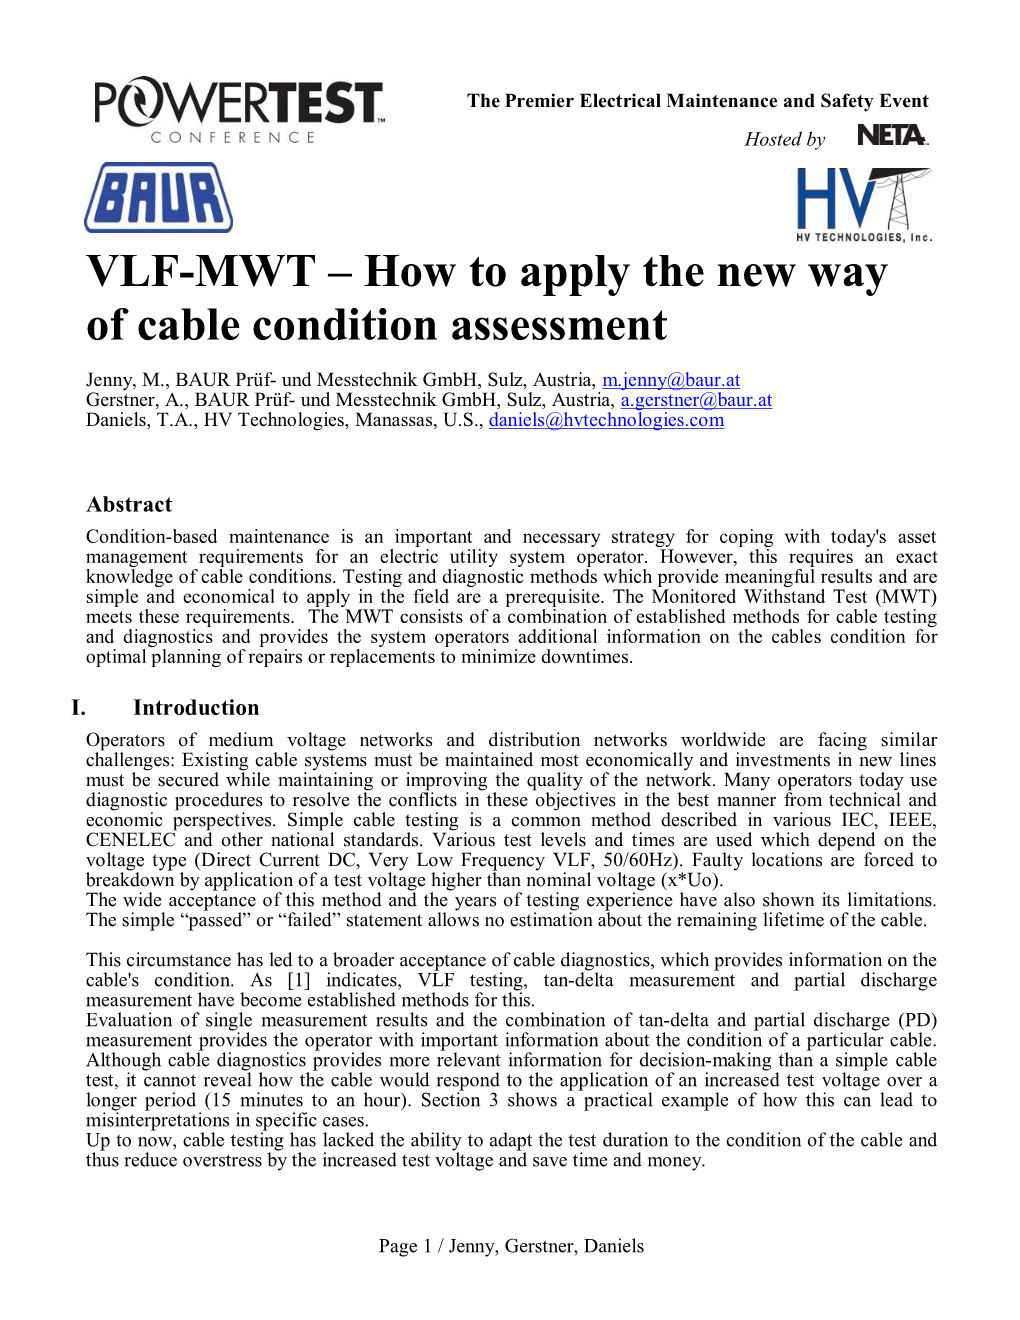 VLF-MWT – How to Apply the New Way of Cable Condition Assessment